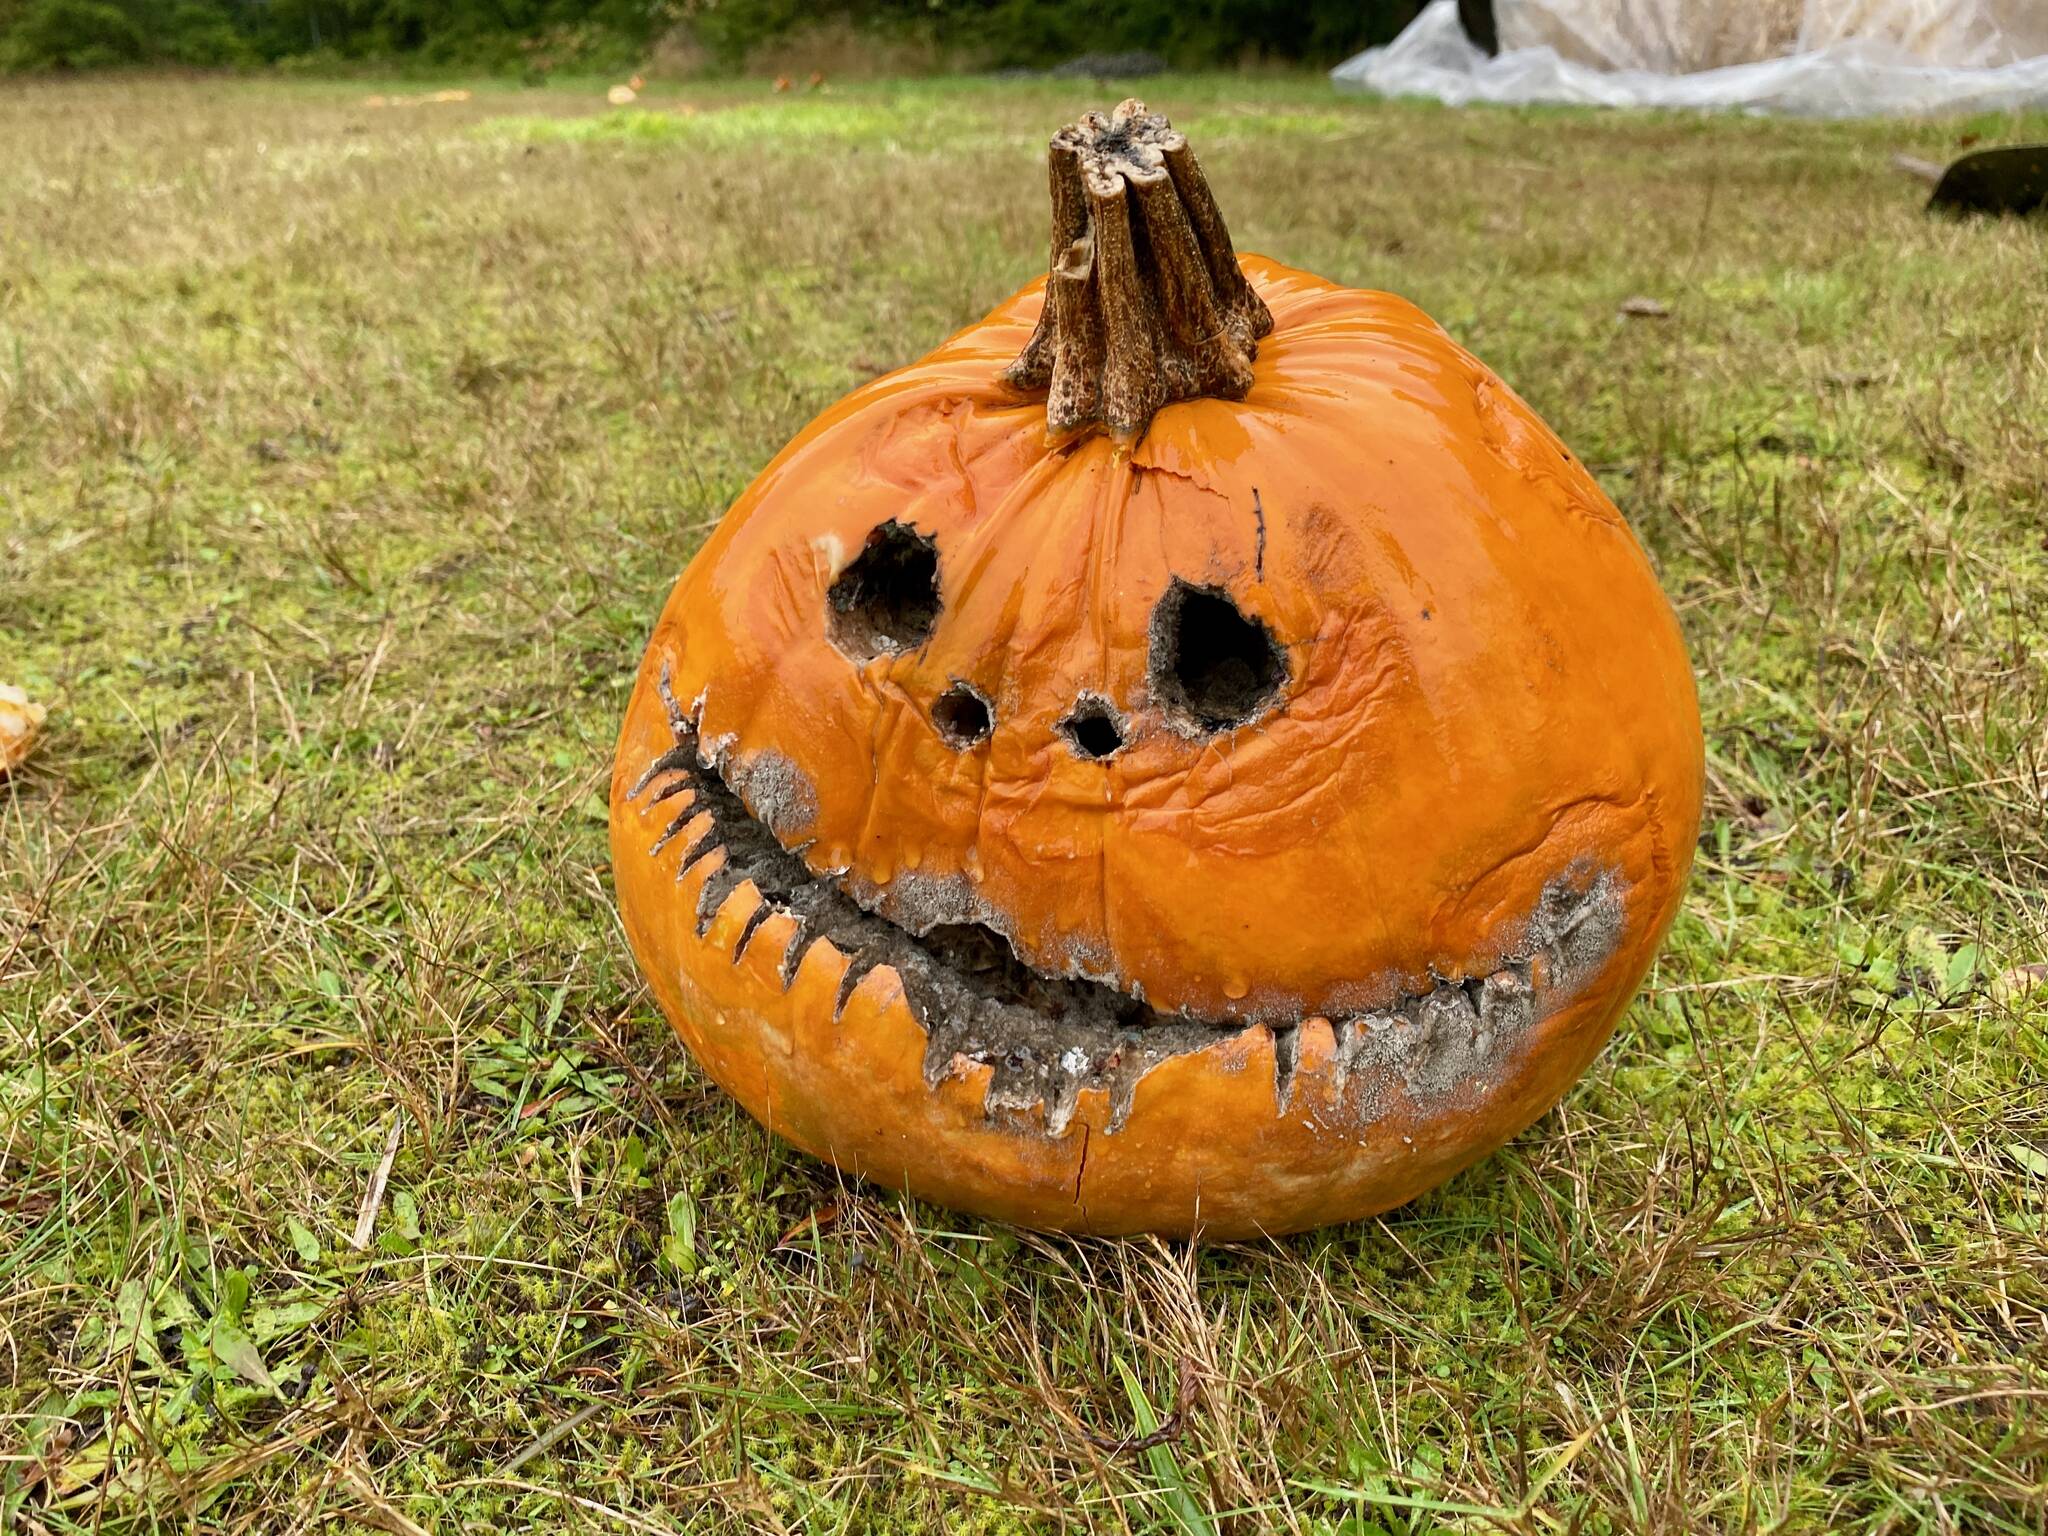 Photo provided
South Whidbey School Farms is looking for old Halloween pumpkins — such as this Jack-o’-Lantern — to be used as part of classes for students about decomposing pumpkins and life cycles.